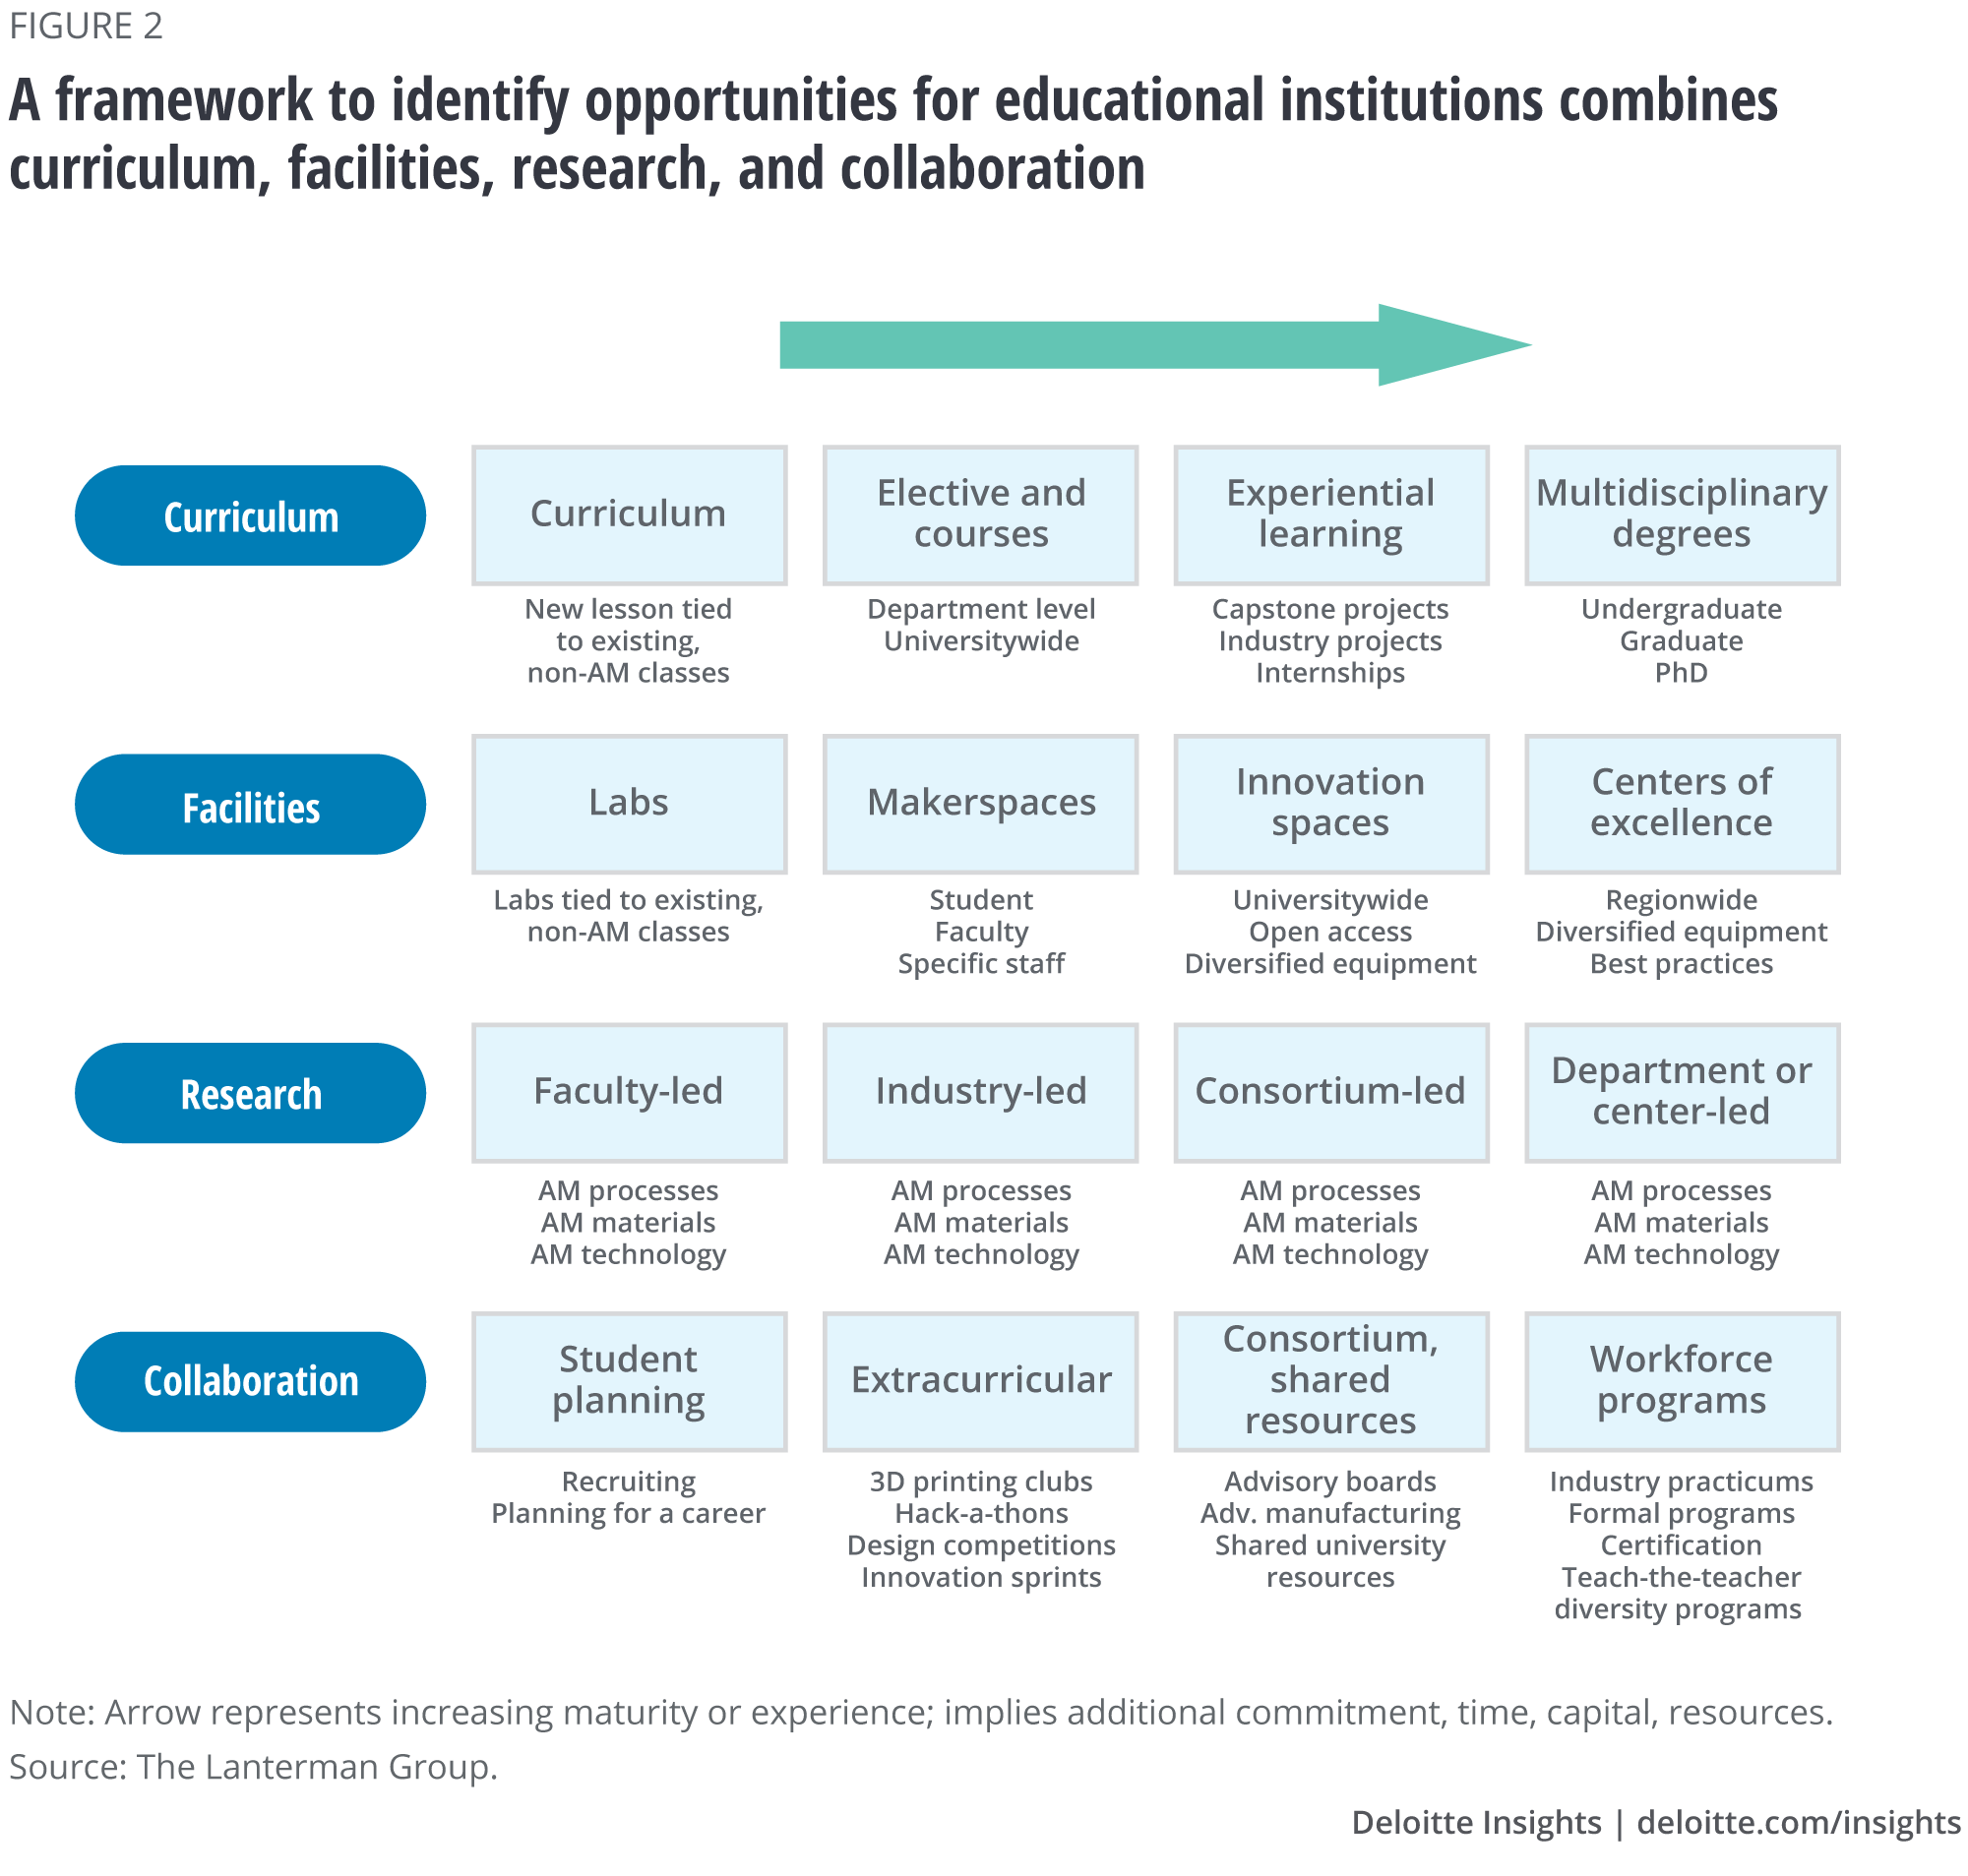 A framework to identify opportunities for educational institutions combines curriculum, facilities, research, and collaboration